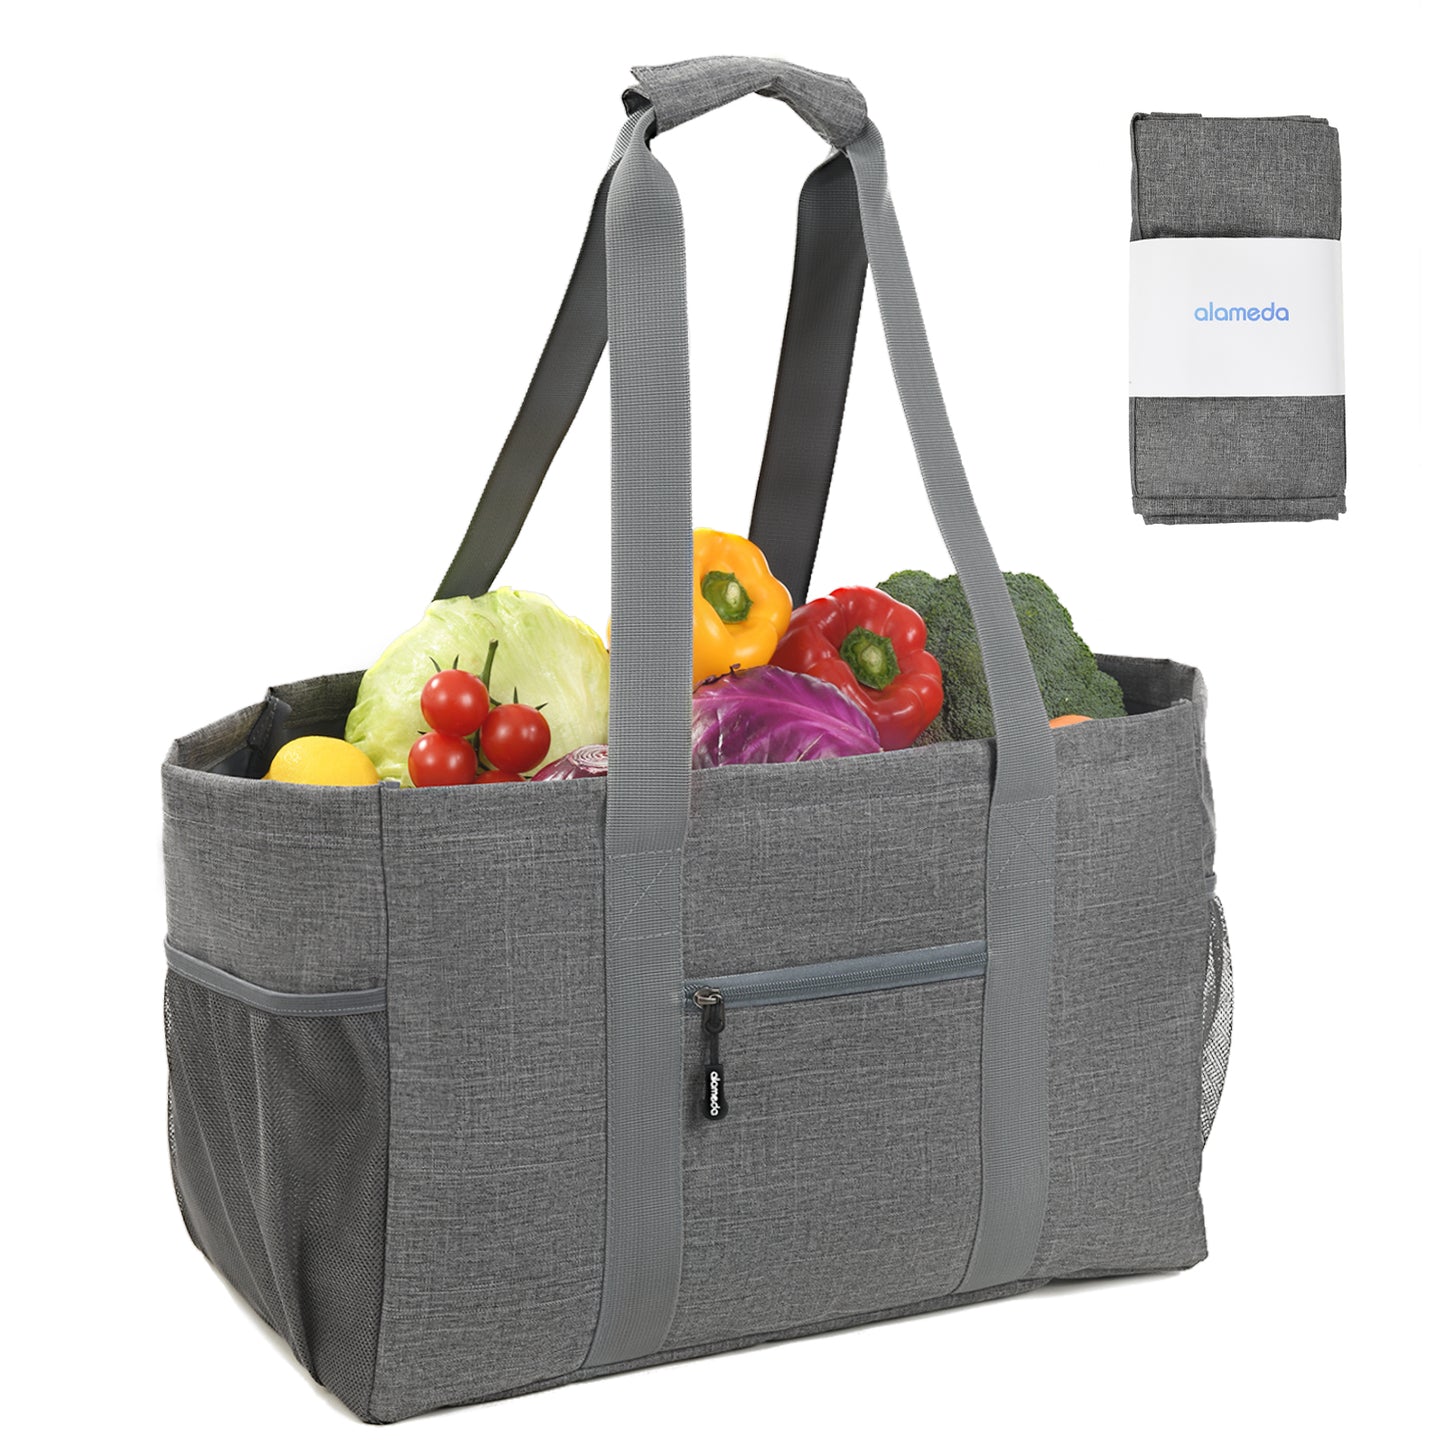 Alameda Large Reusable Grocery Bags with Pocket: Foldable Shopping Bag with Long Handles, Washable Canvas Tote Bags, Heavy Duty, Water Resistant, Durable, Gray